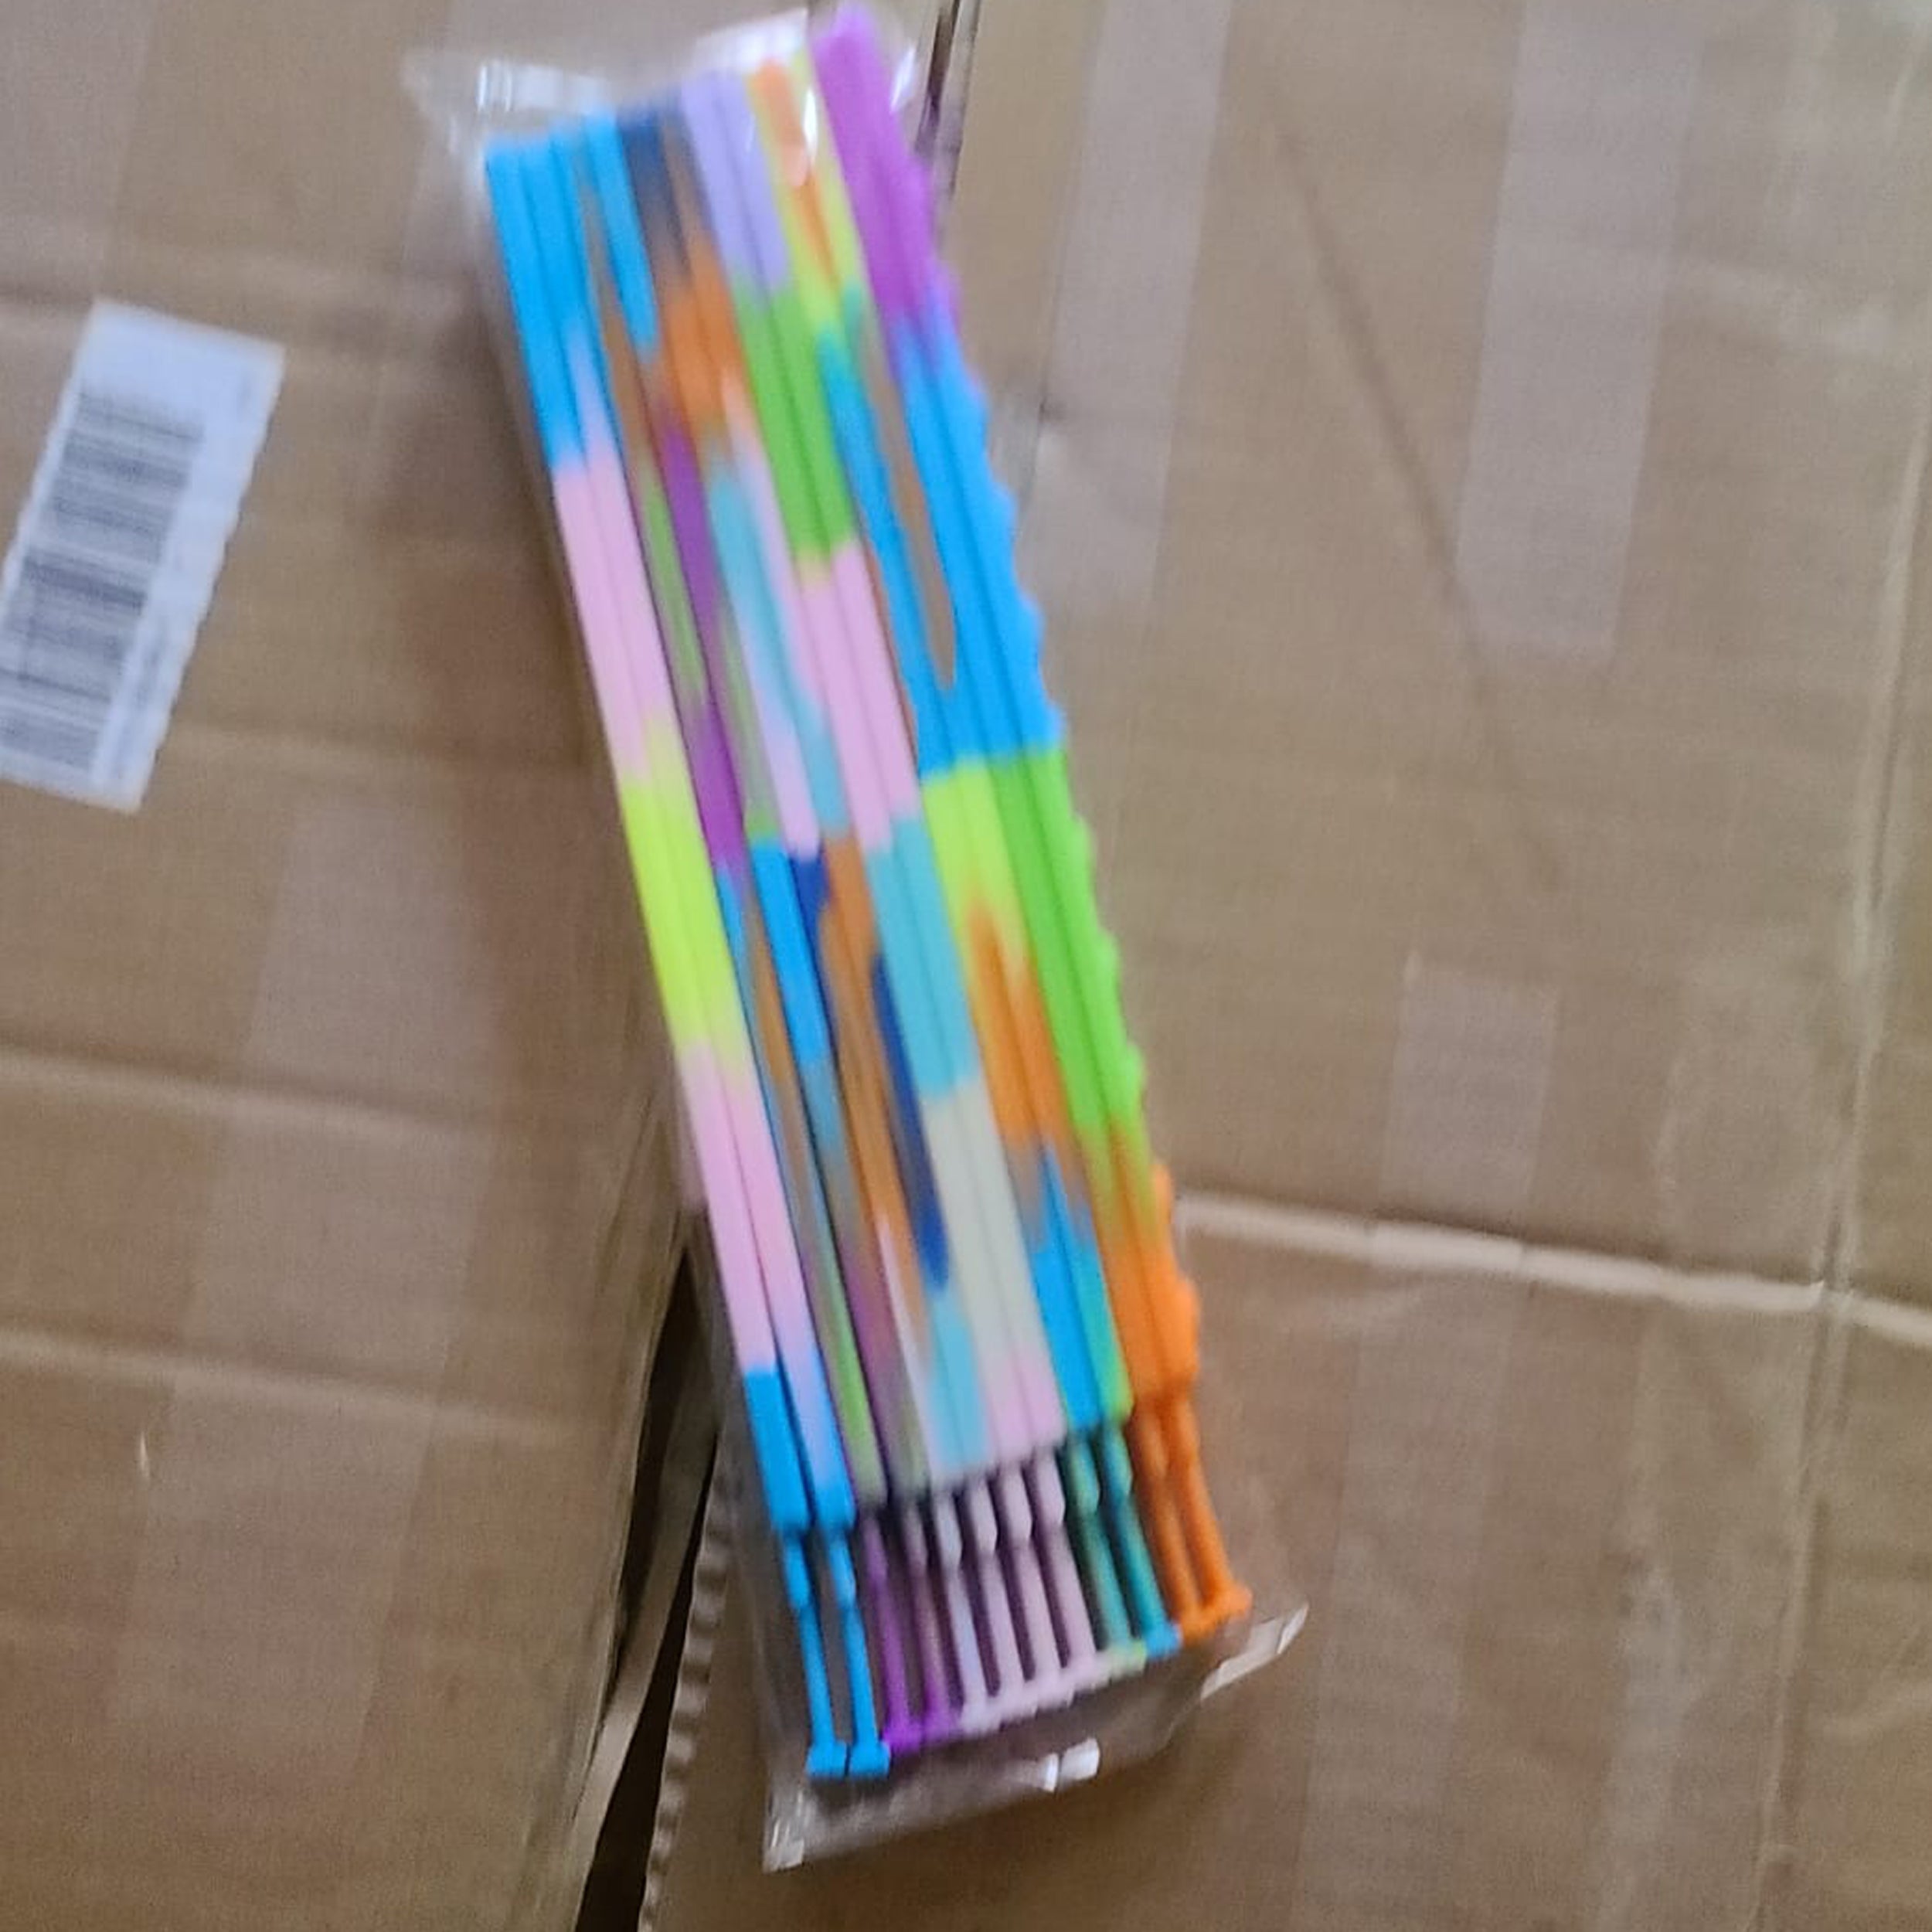 Packing Image Of Wrist Band Pop Toy